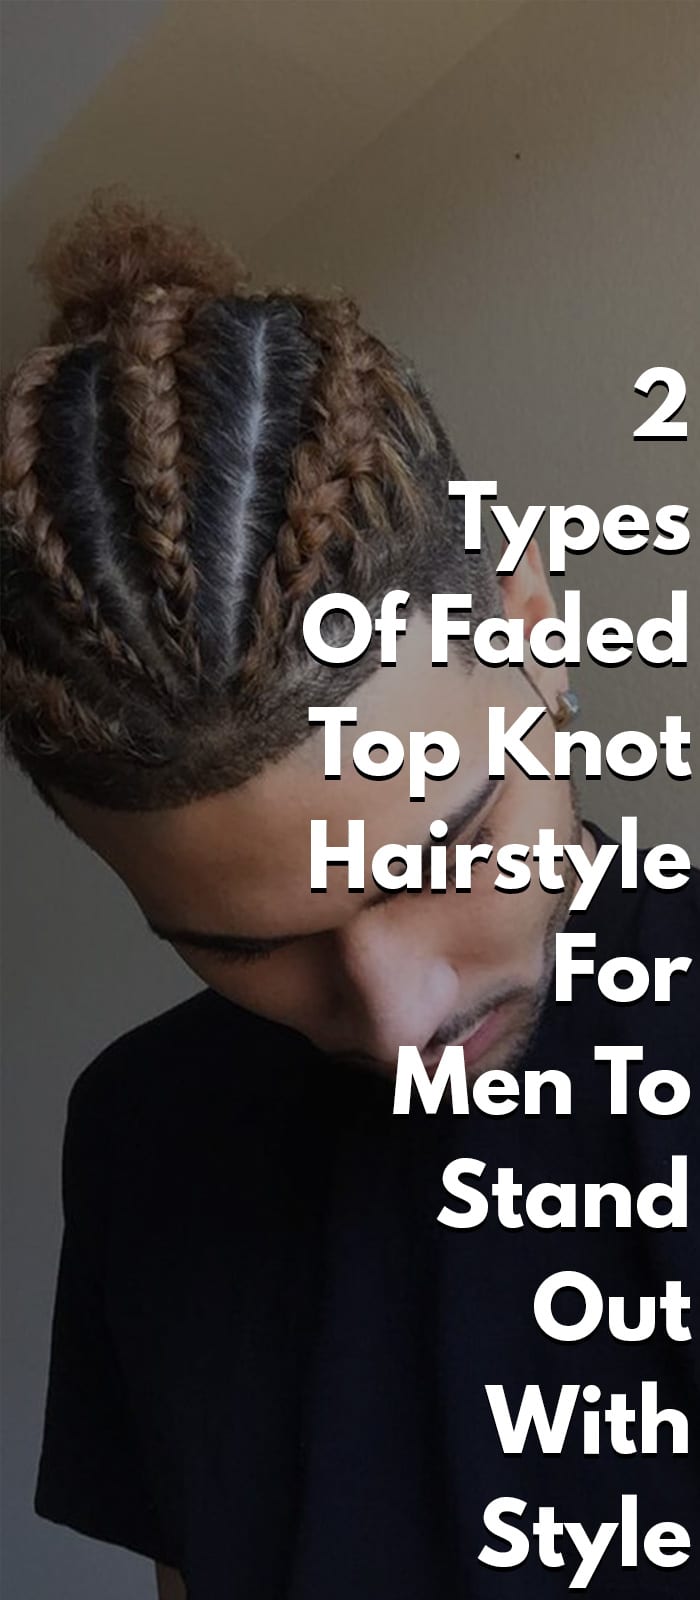 2 Types Of Faded Top Knot Hairstyle For Men To Stand Out With Style